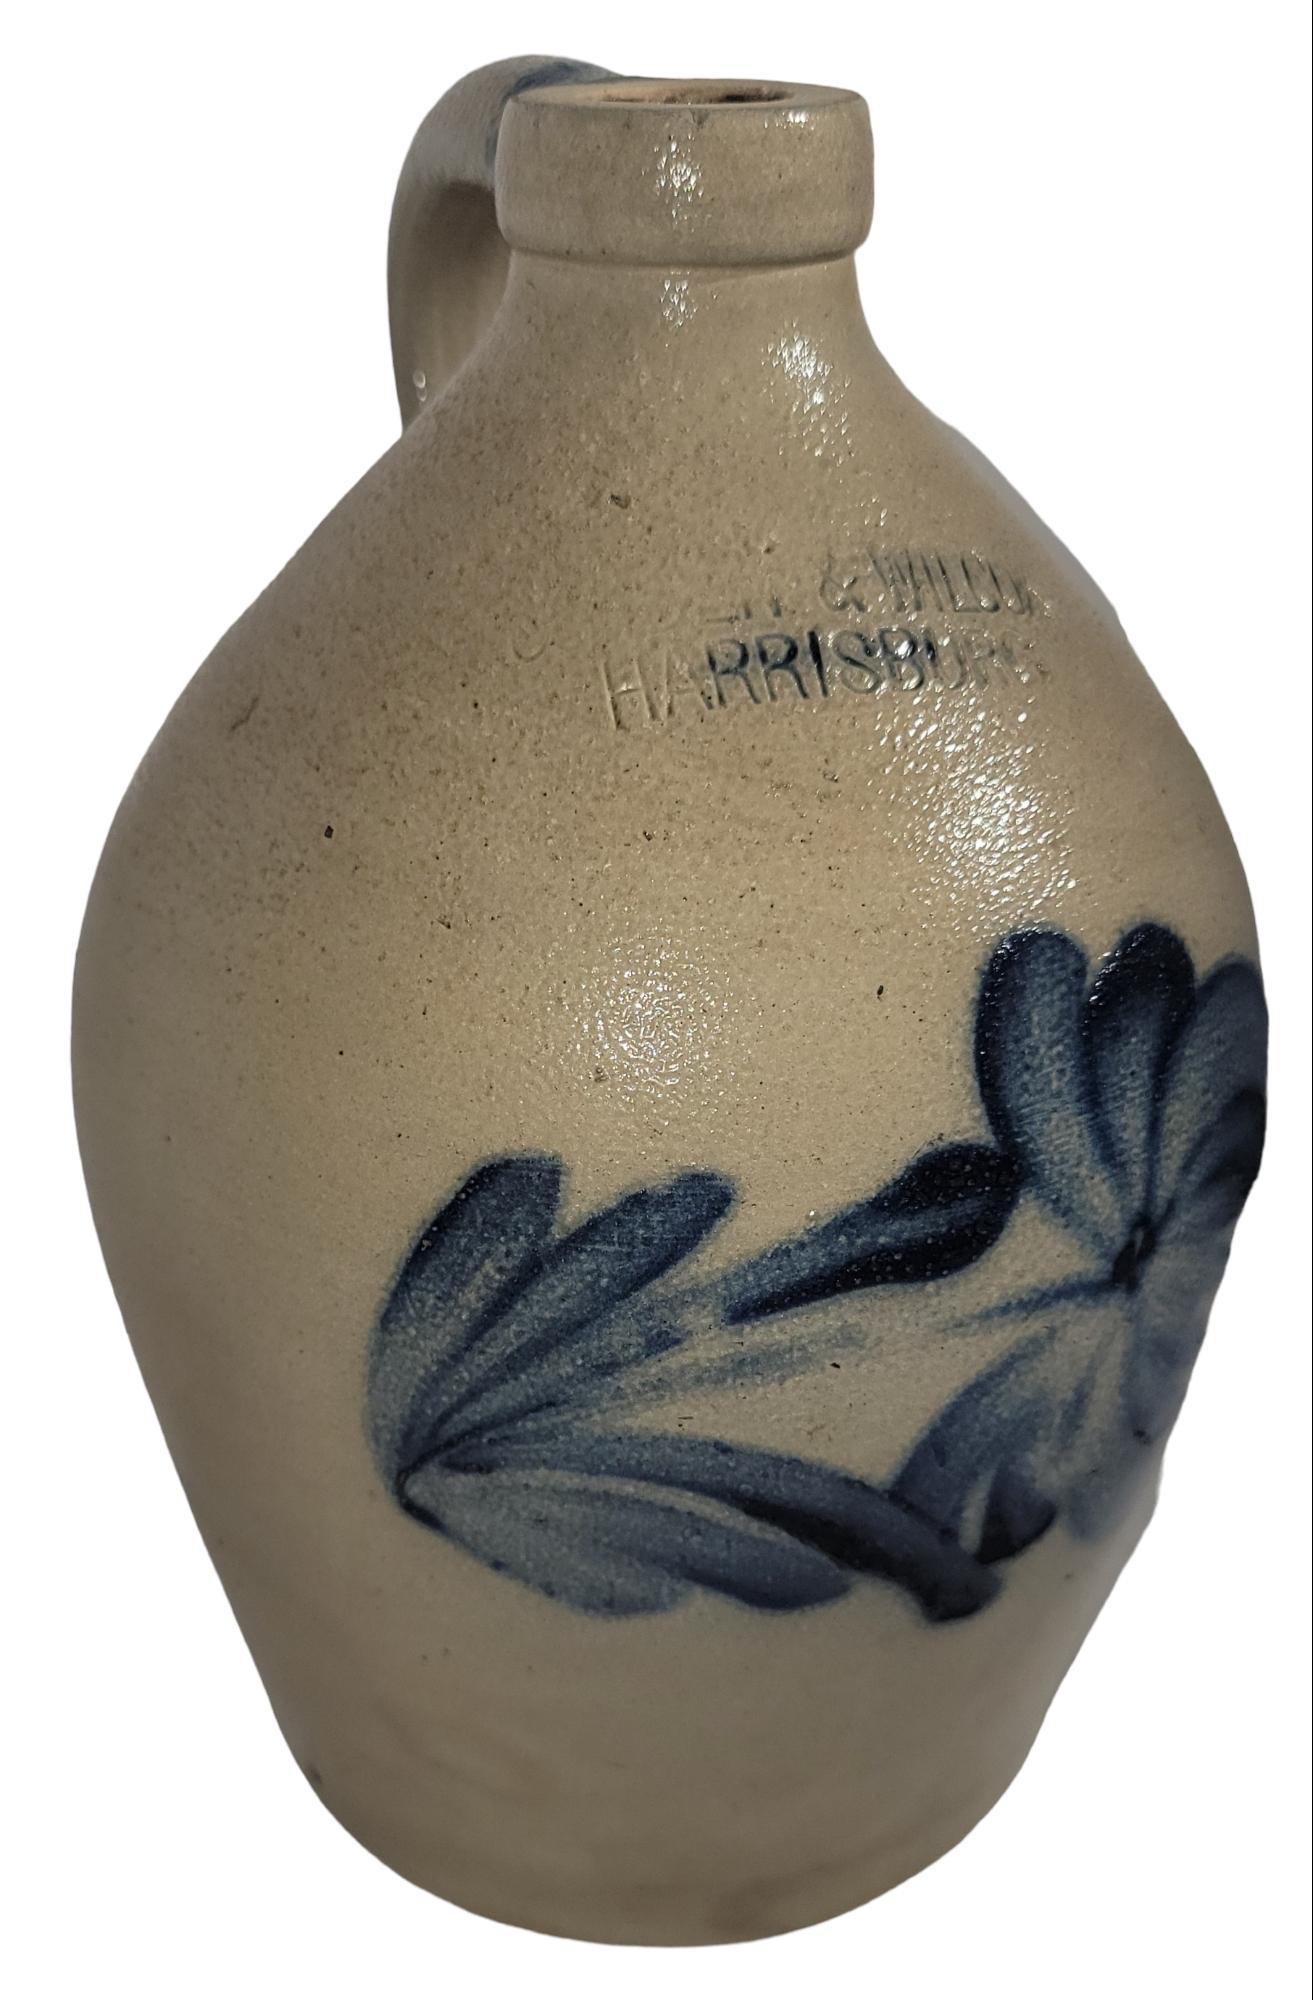 This 19th century hand decorated or painted Cowden & Wilcox jug from Harrisburg, Pennsylvania in fine condition. These decorated stoneware jugs are hard to find in such fine condition.